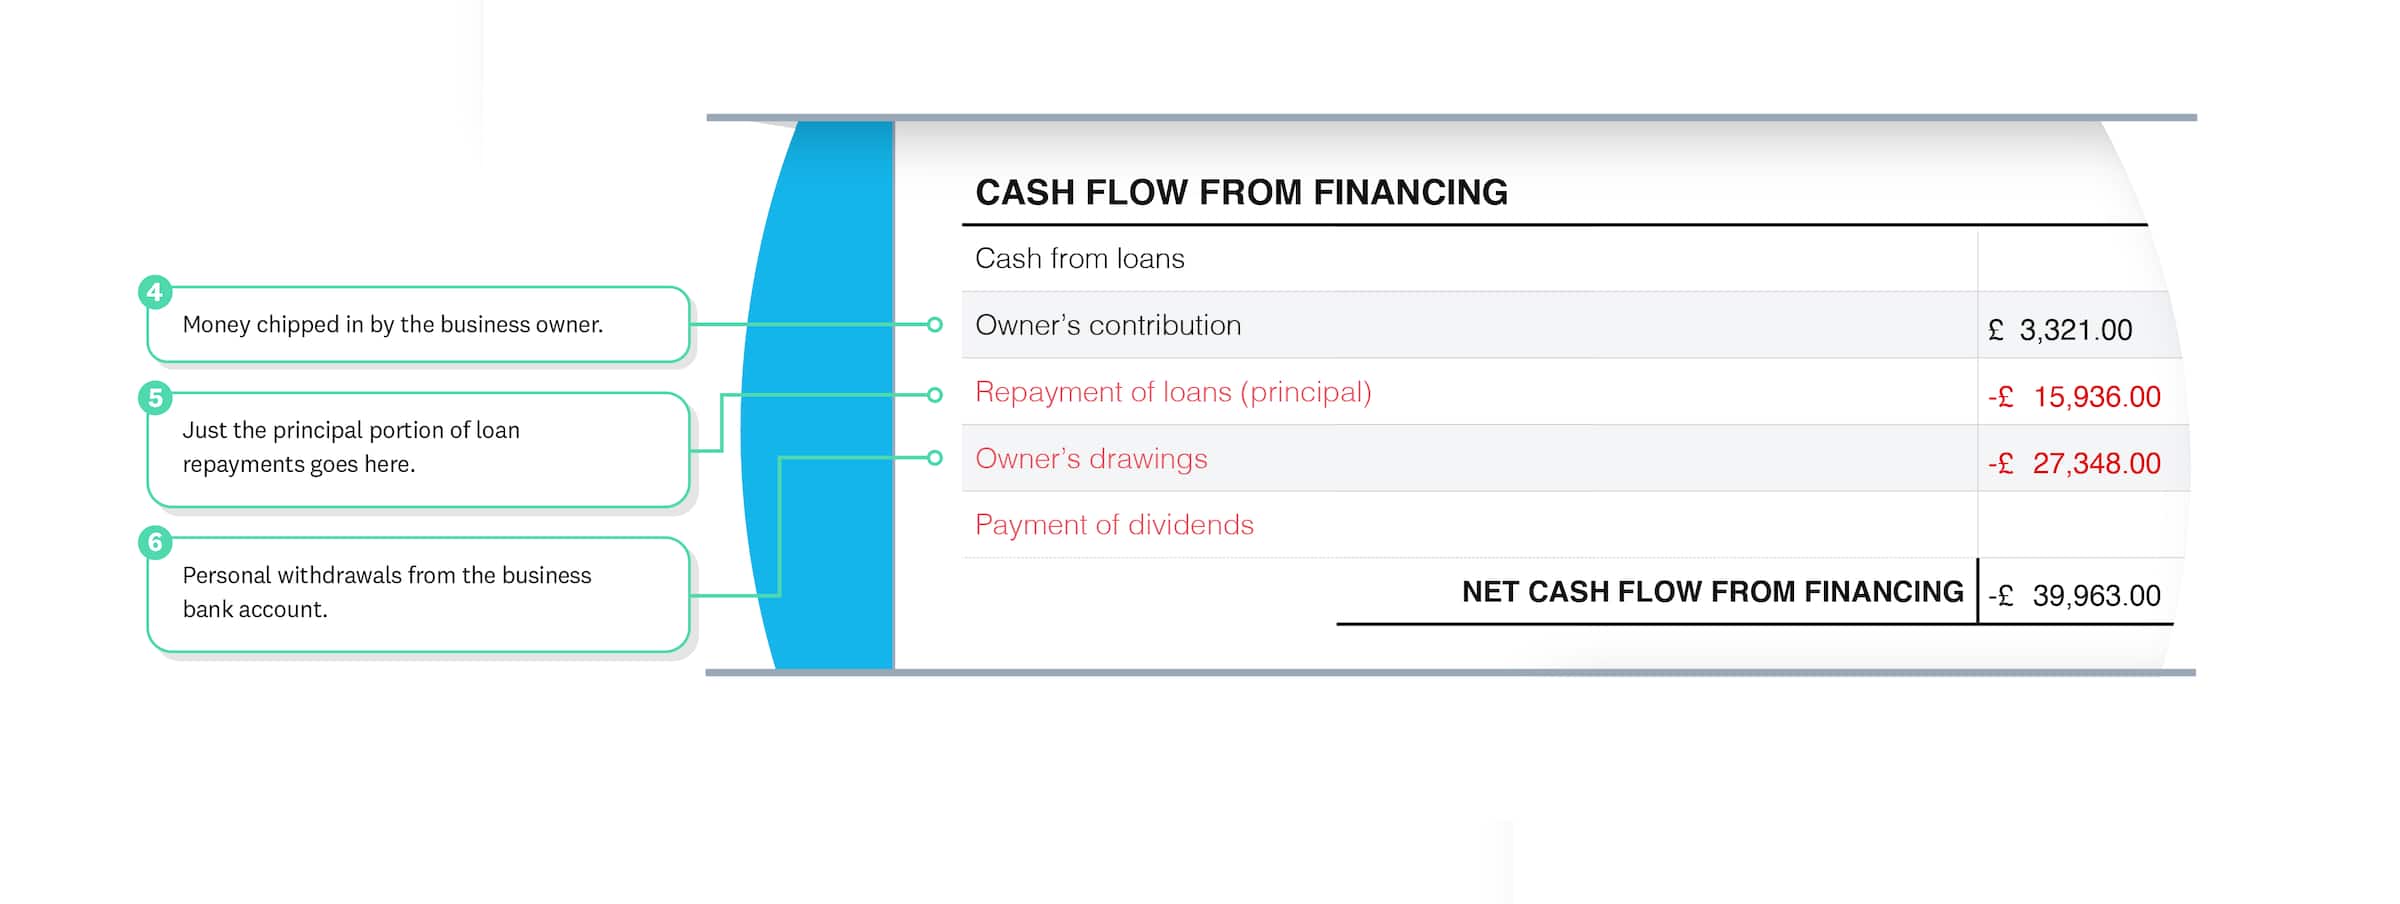 Cash flow from financing shows cash received from investors and lenders, minus cash paid to them as repayments or dividends.